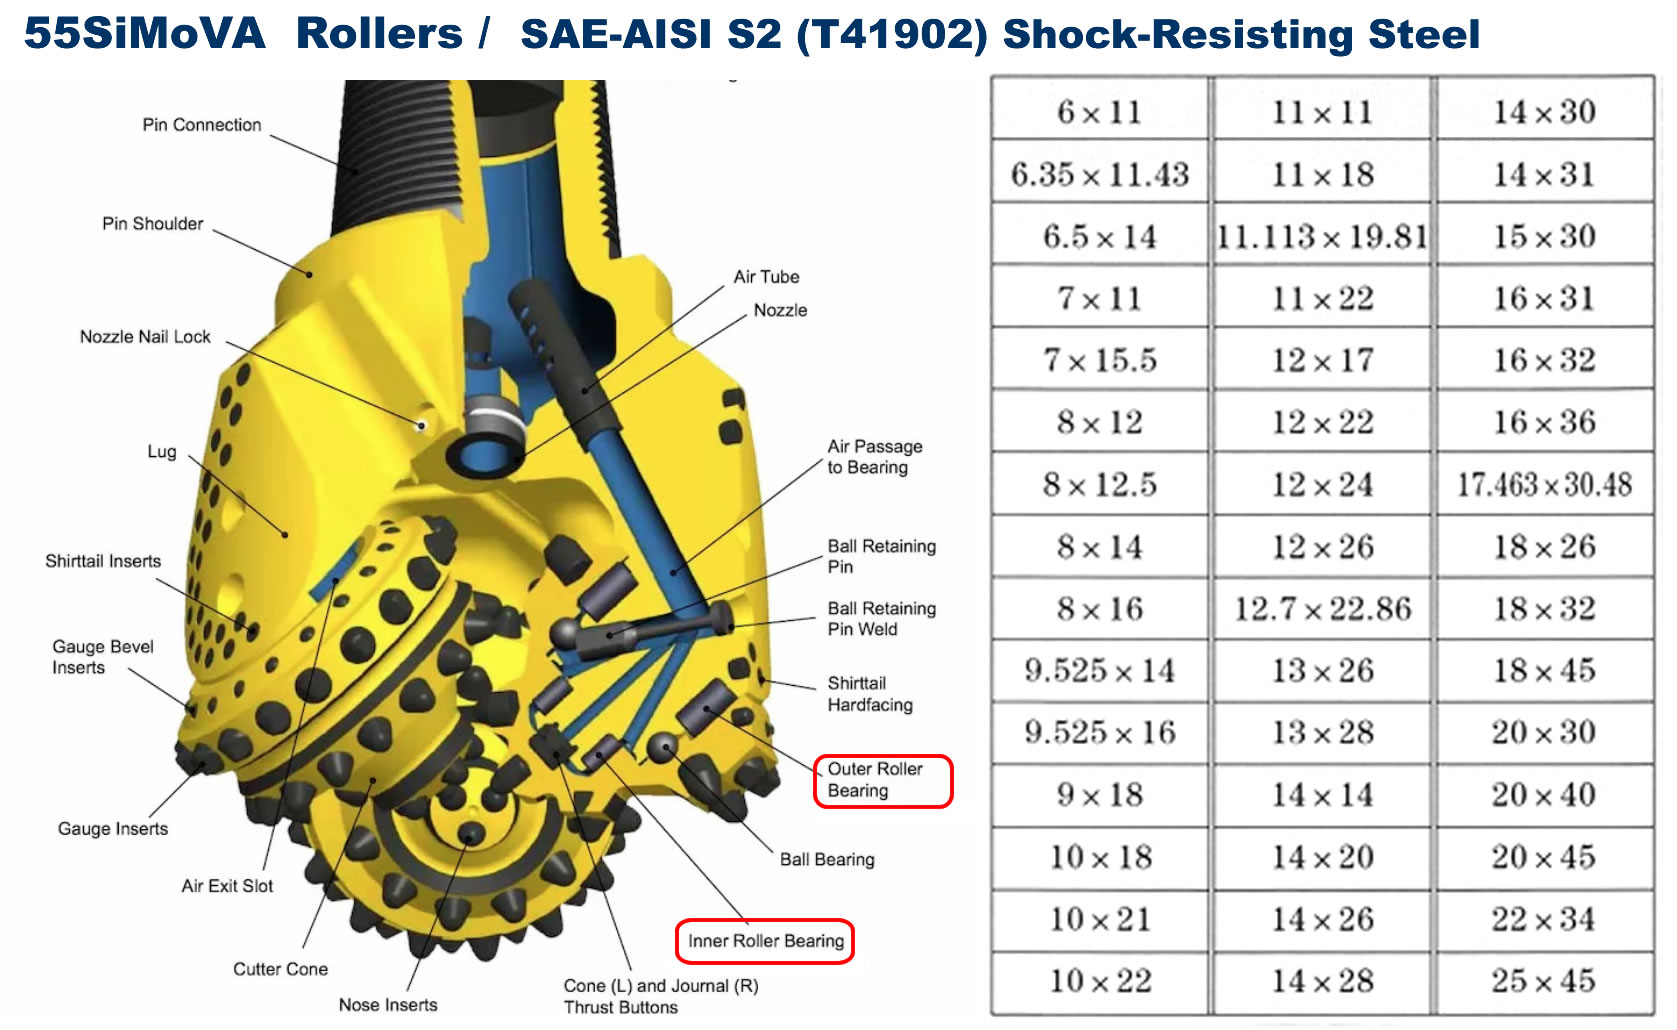 SAE-AISI S2 (T41902) Shock-Resisting Steel ,55SiMoVA Rollers